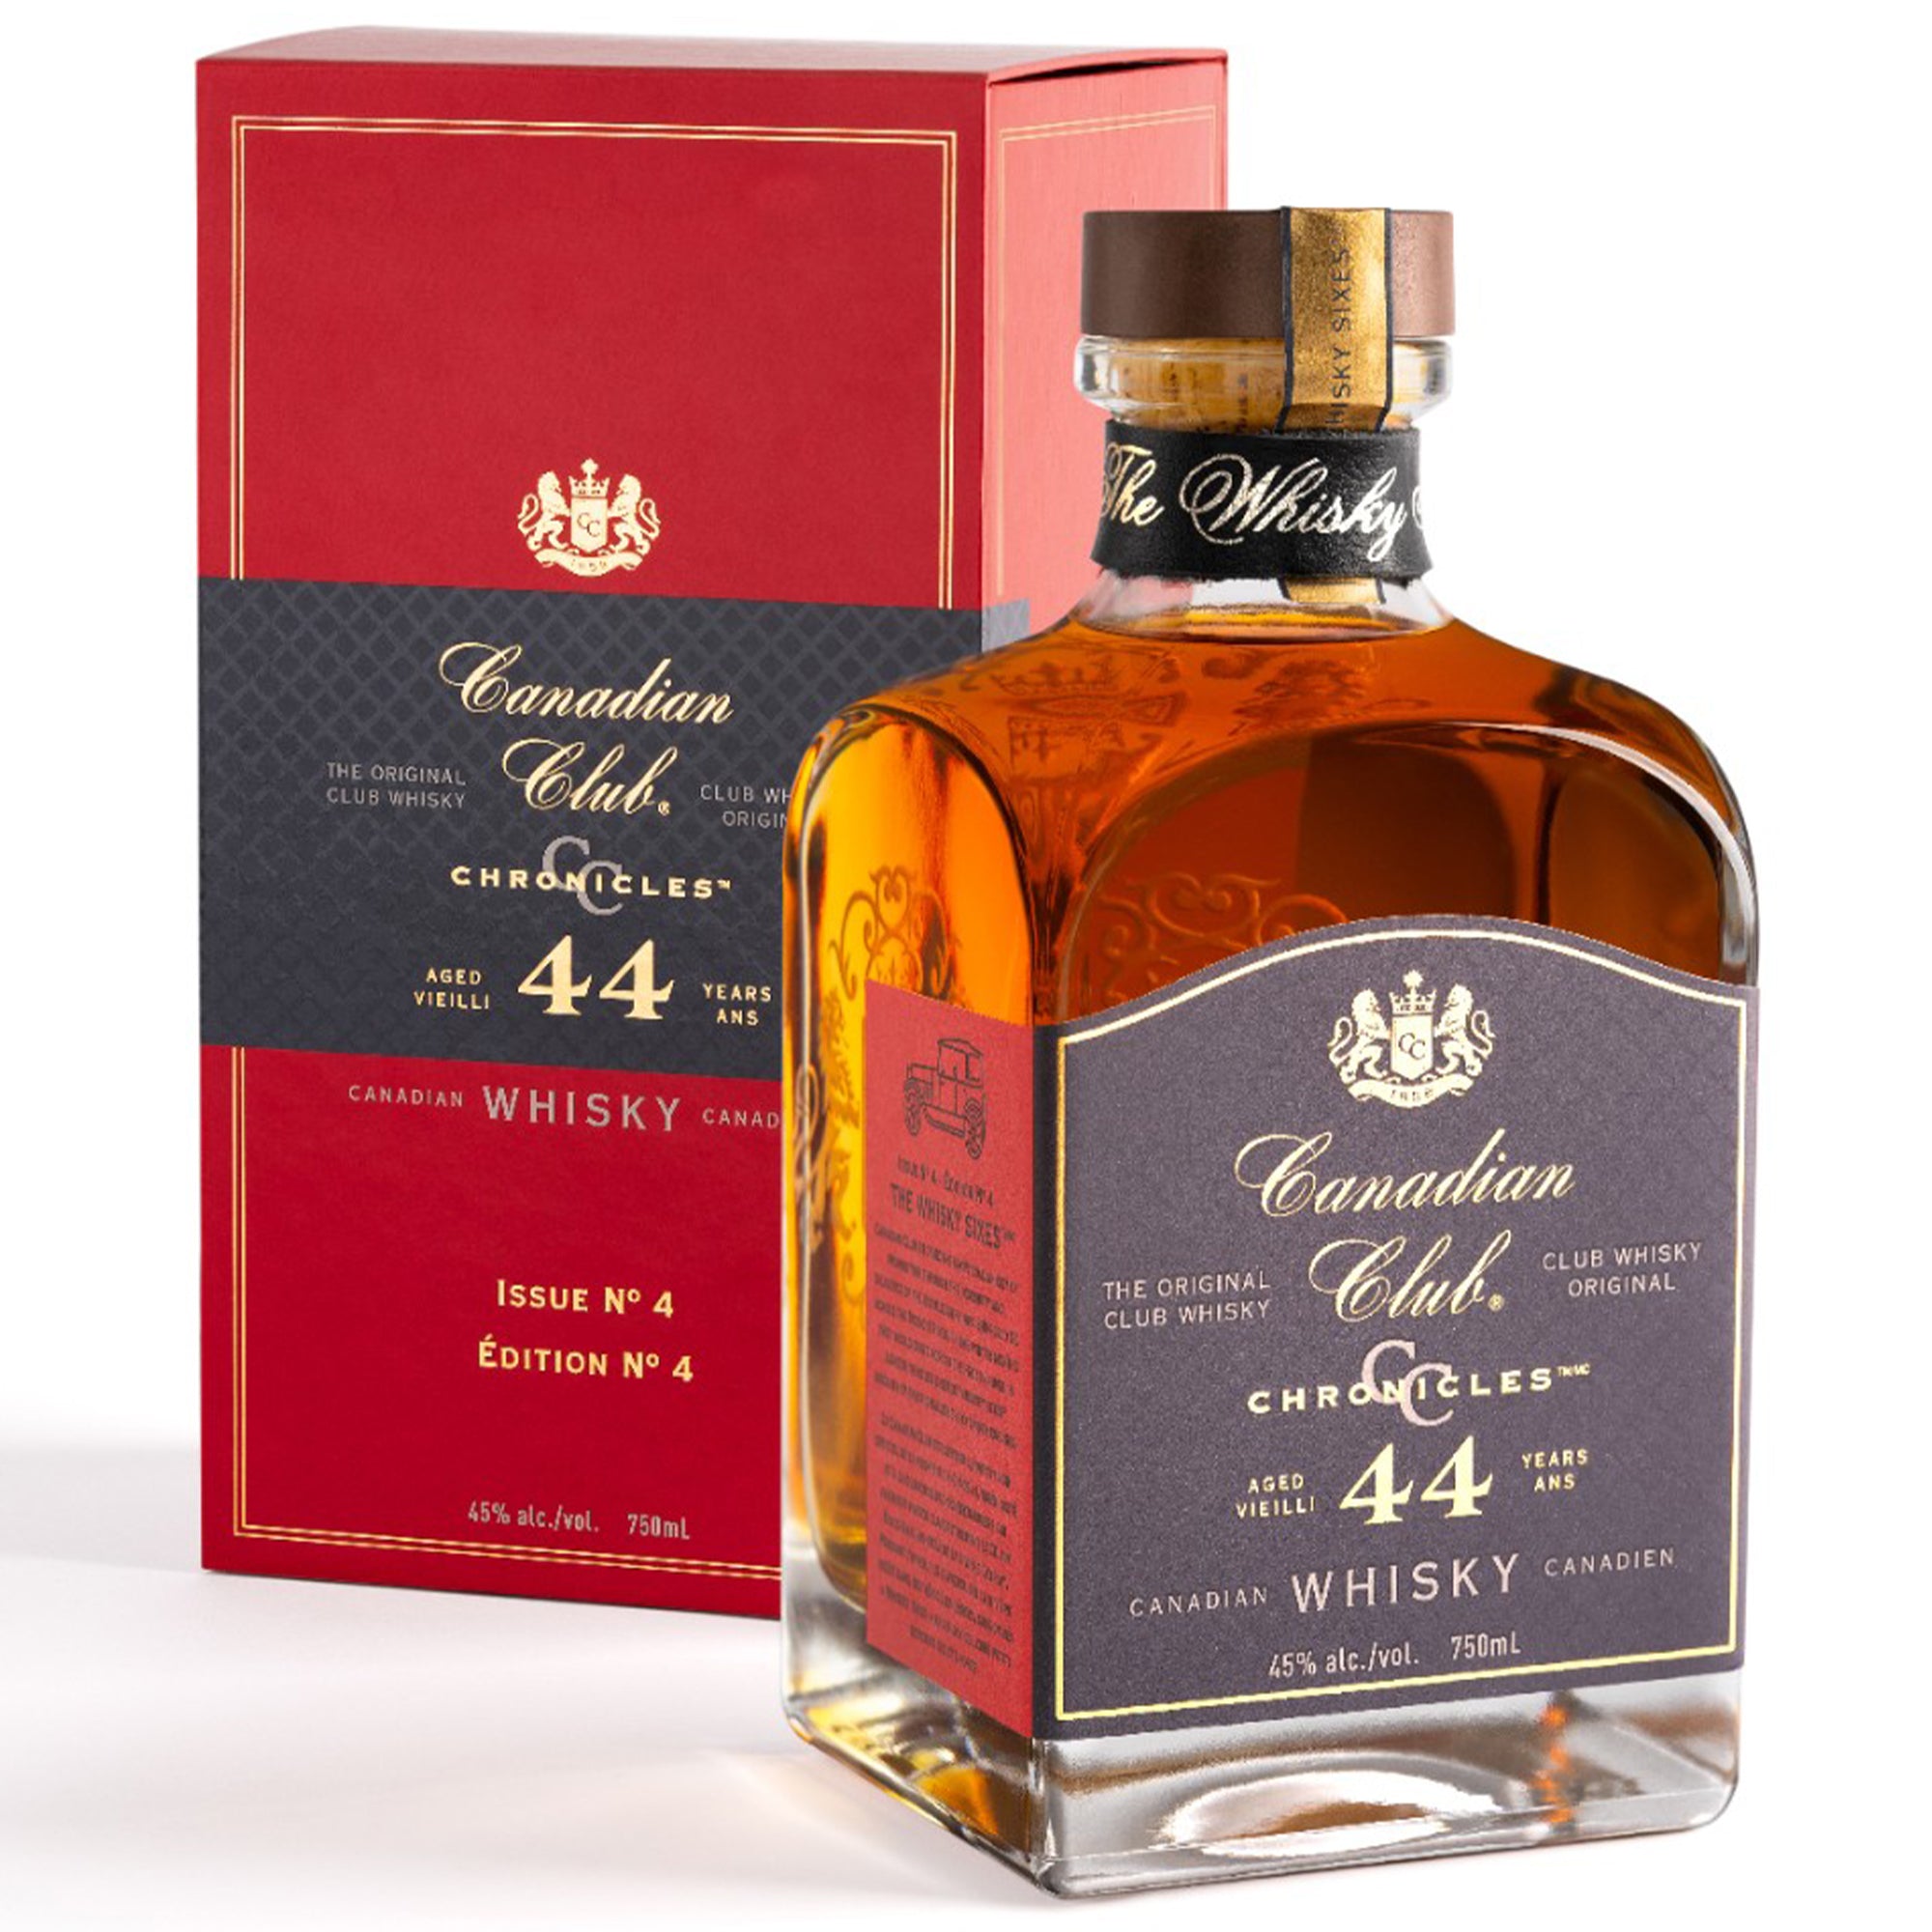 Canadian Club "Issue No. 4" Chronicles 44 Year Old Canadian Whiskey